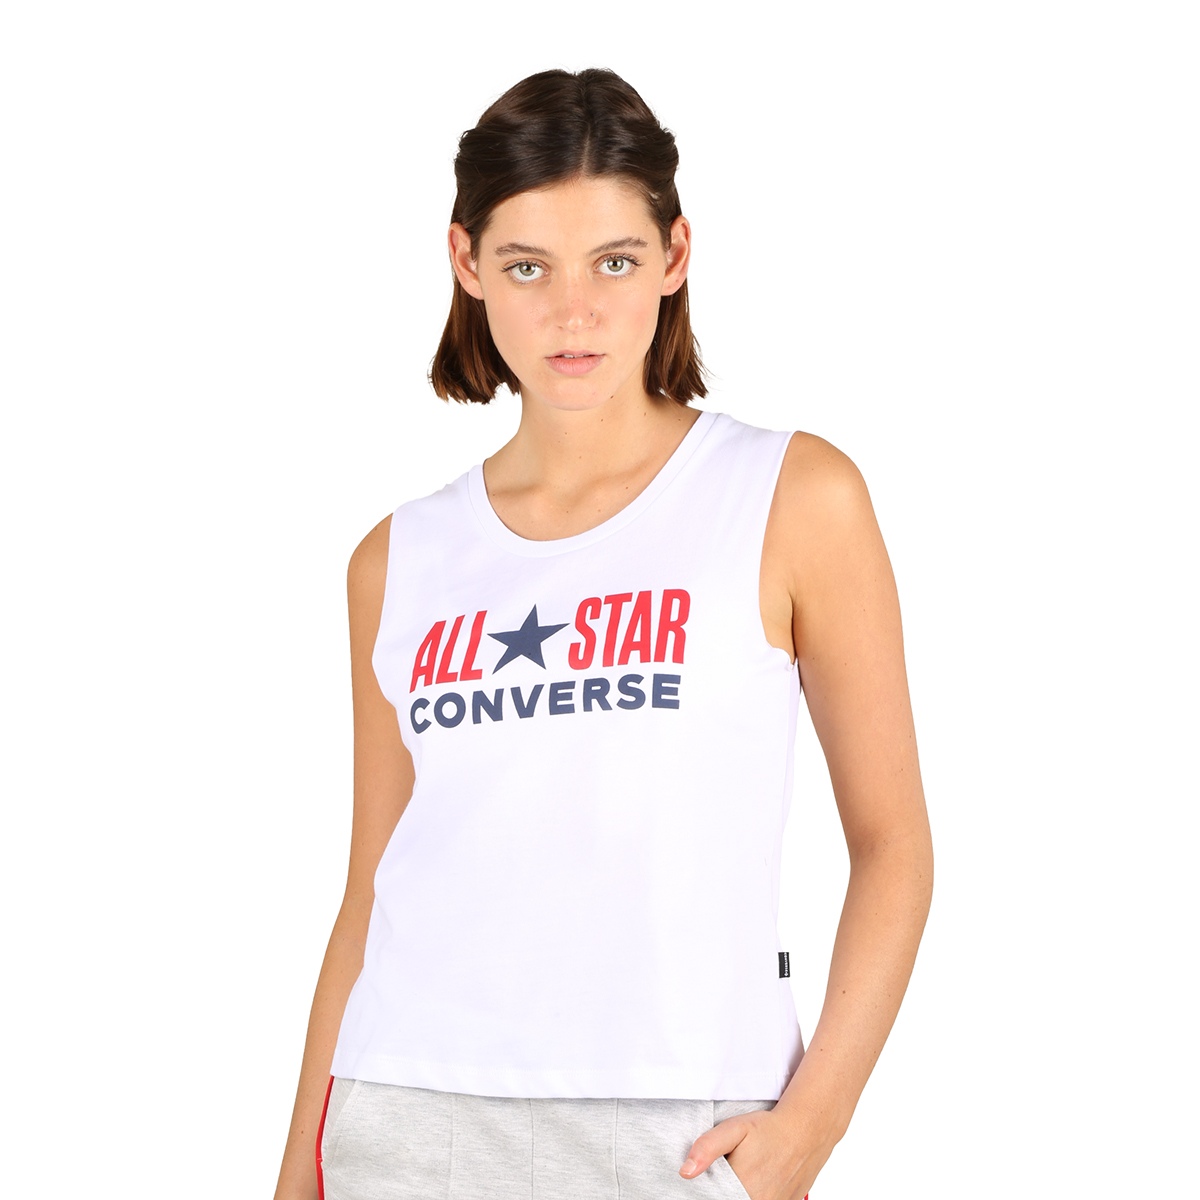 Musculosa Converse All Star,  image number null